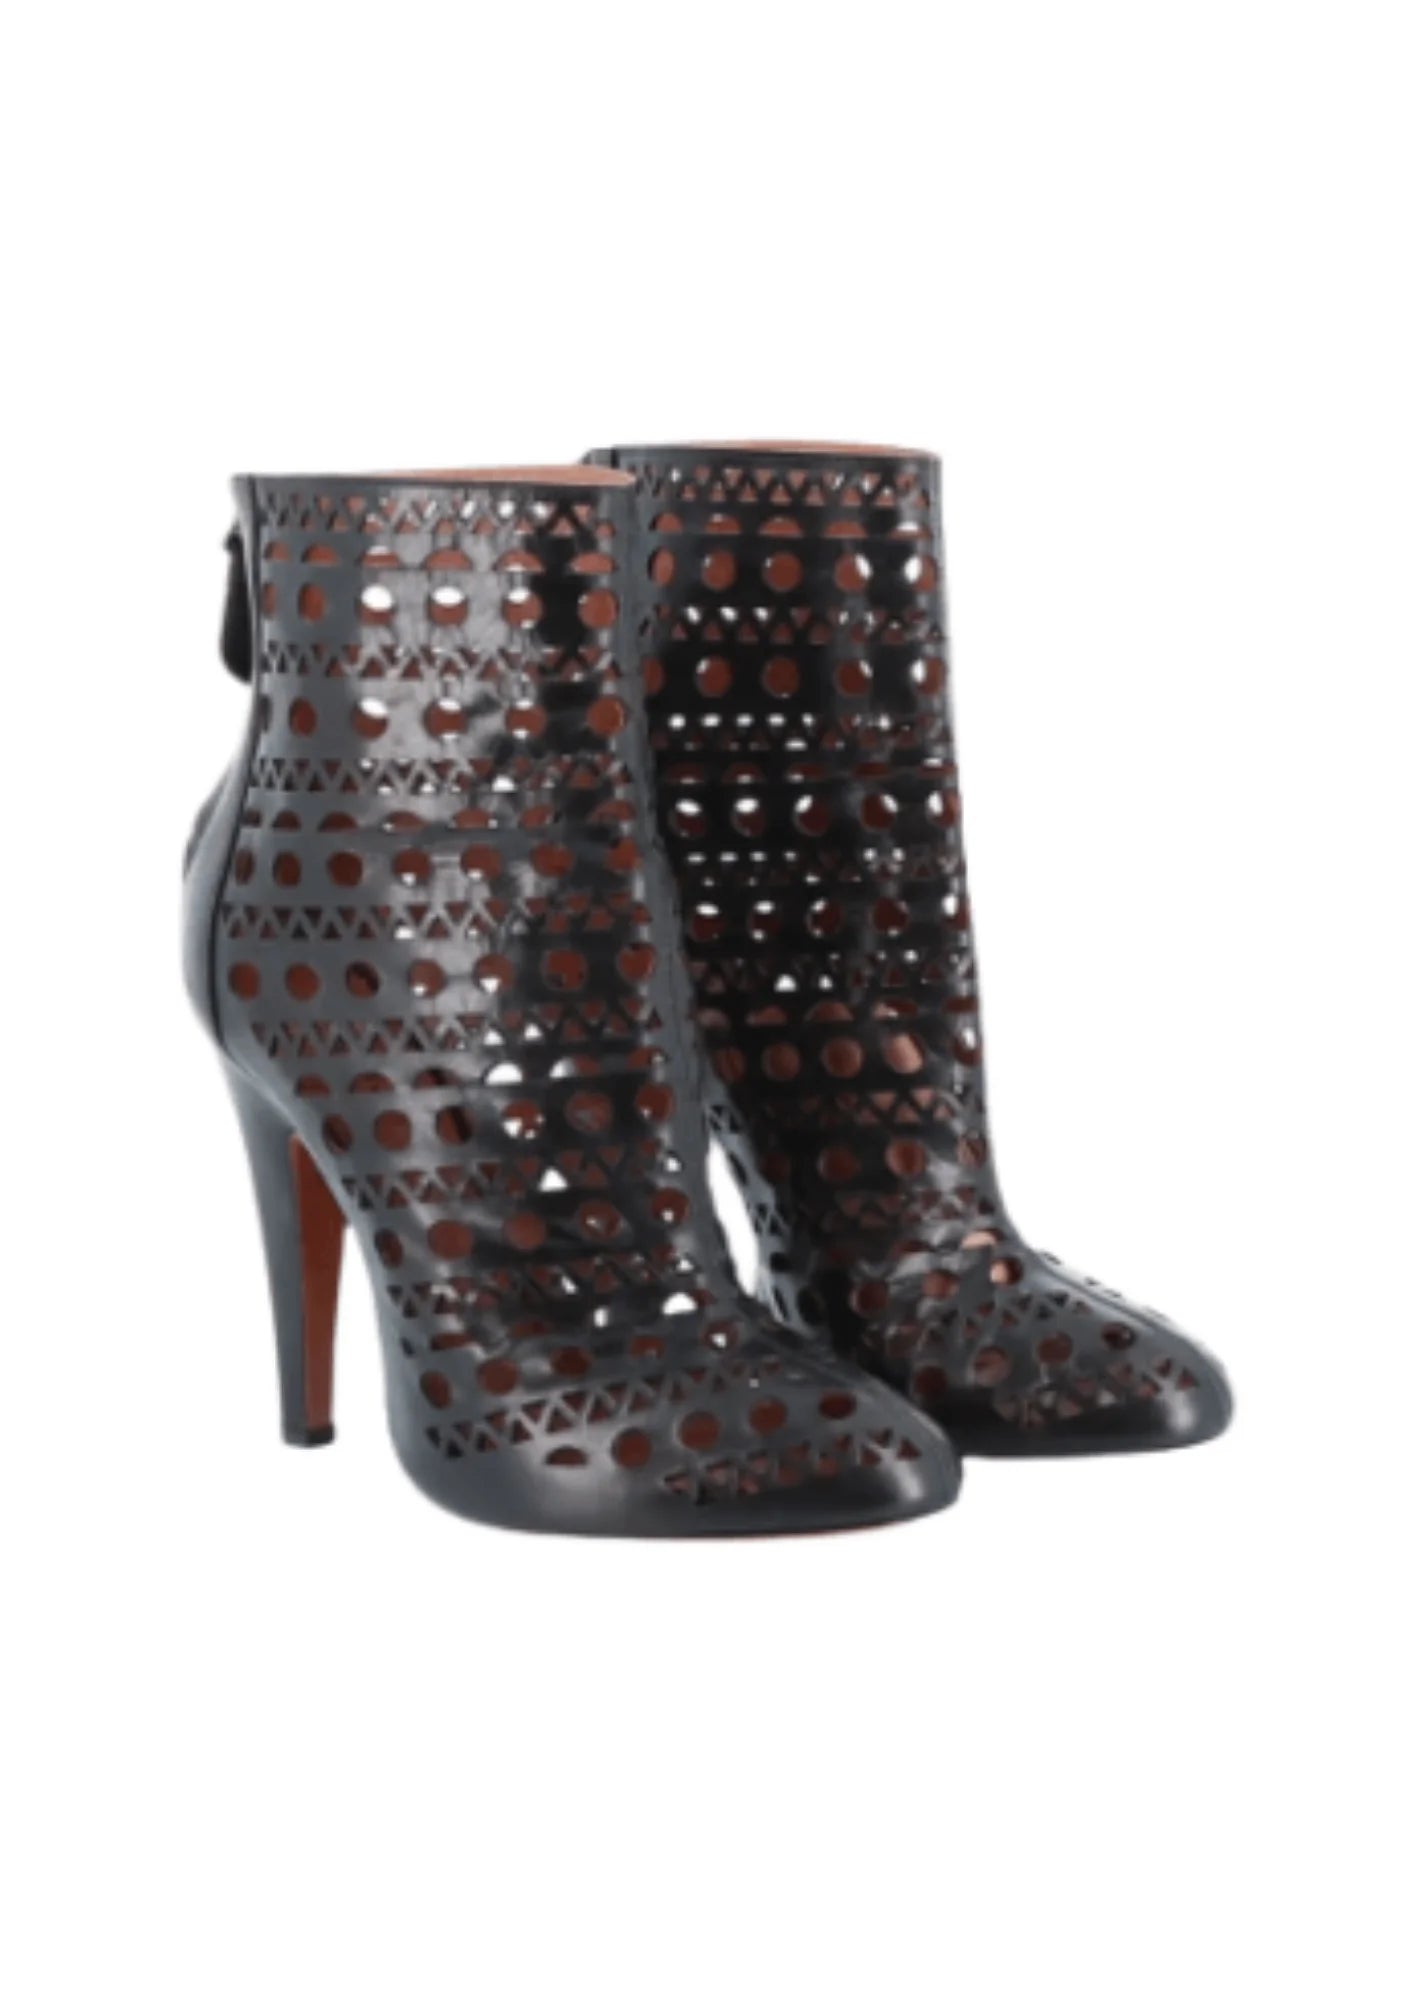 BLACK OPENWORK LEATHER BOOTS